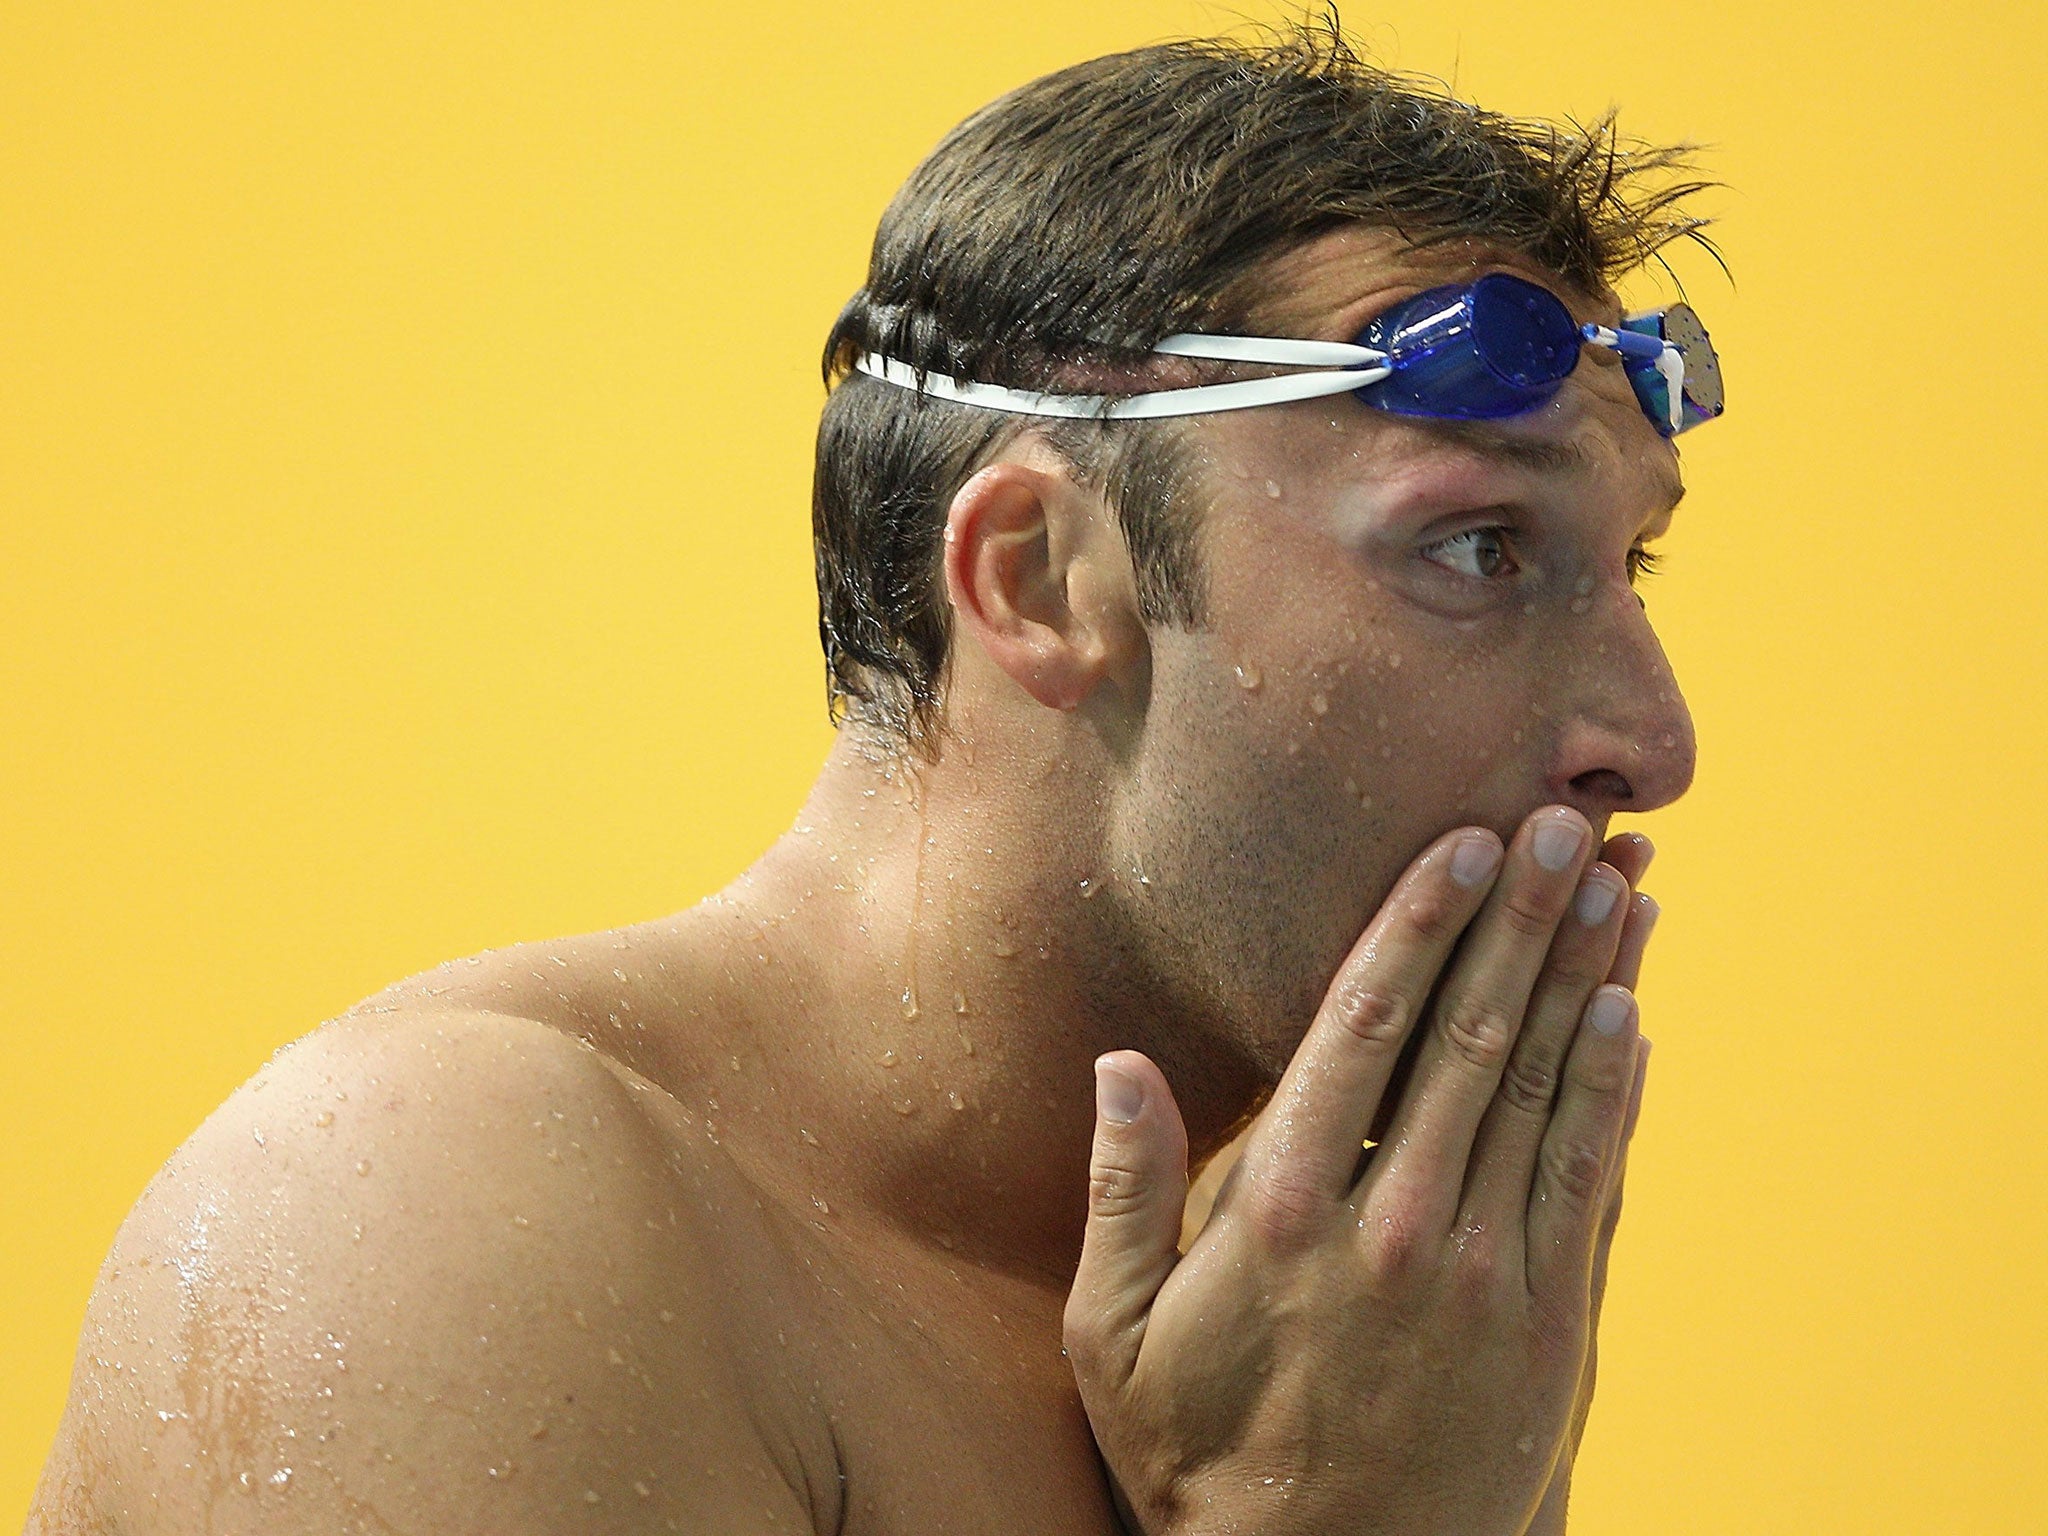 Looking ahead: Australia’s five-time Olympic gold medallist Ian Thorpe has battled depression and alcohol abuse